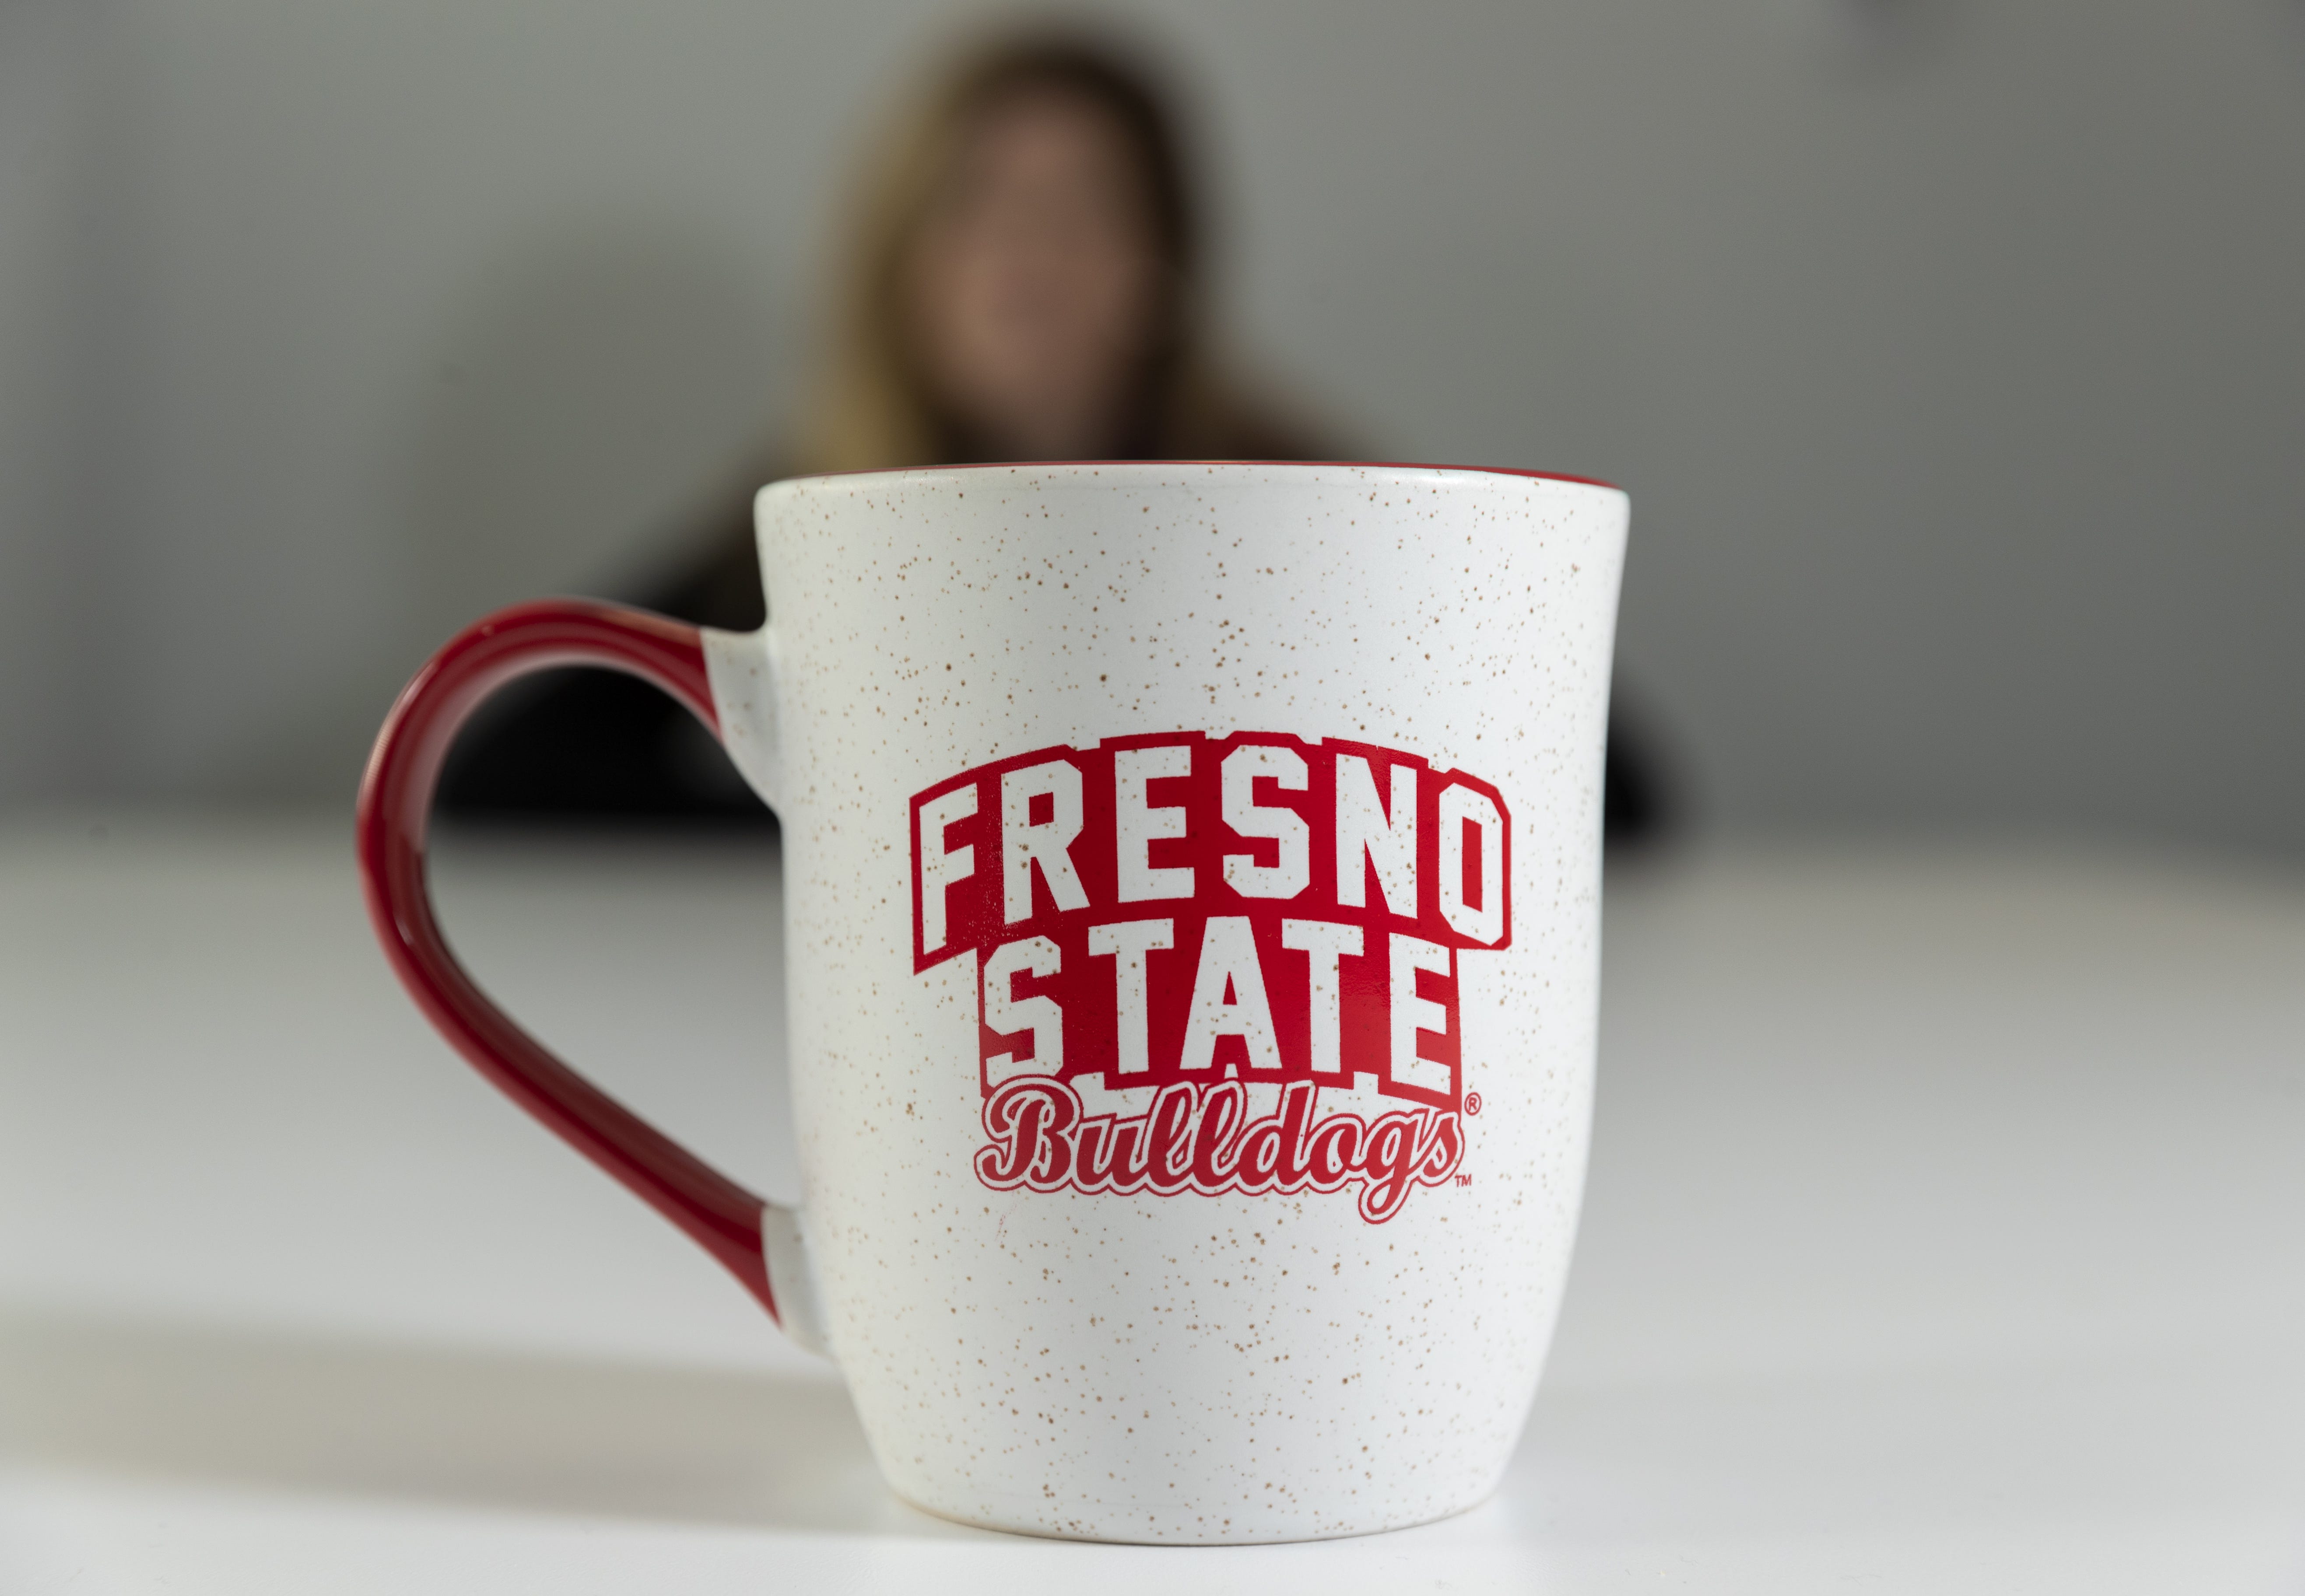 A former doctoral student who worked full-time for Frank Lamas sits, out of focus, behind a Fresno State coffee mug. She filed a Title IX complaint against him in October 2019 saying he sexually harassed her for nearly a year.